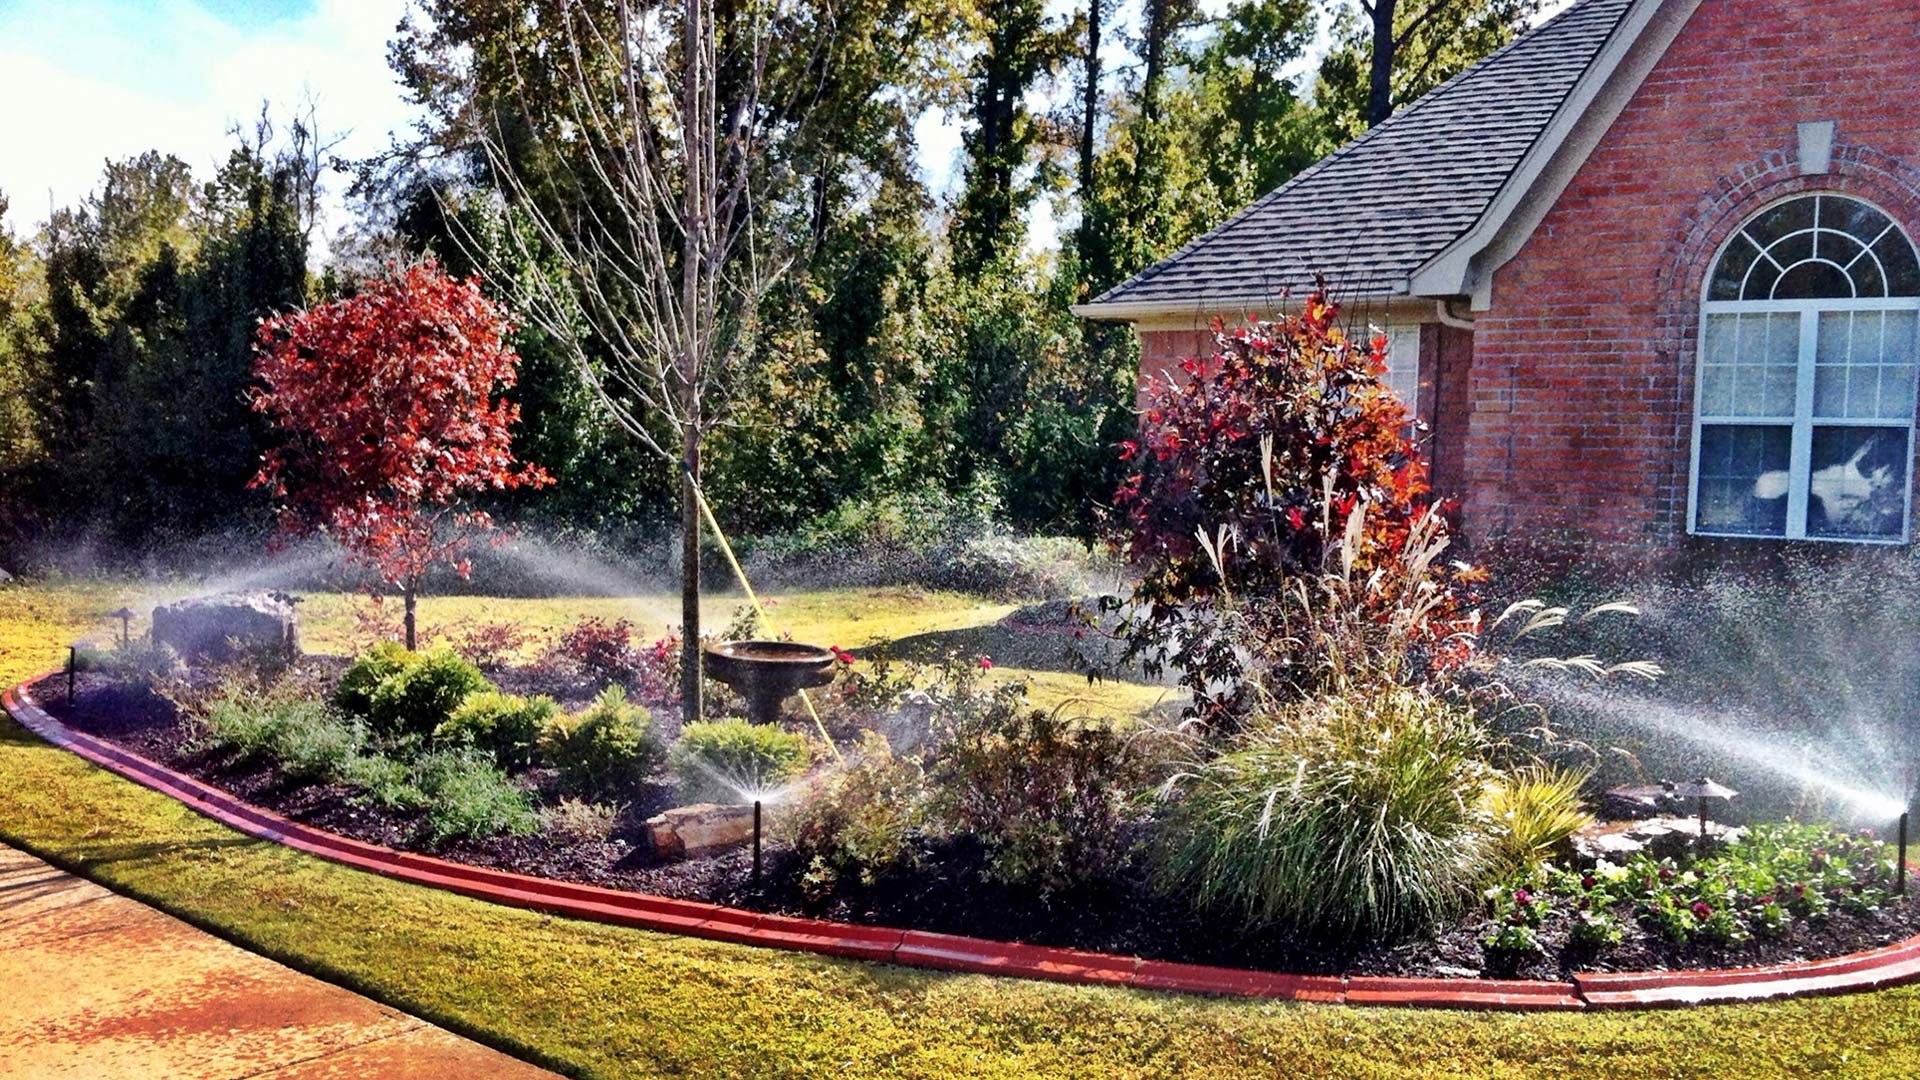 An irrigation system in use on a property in Oakland, TN.